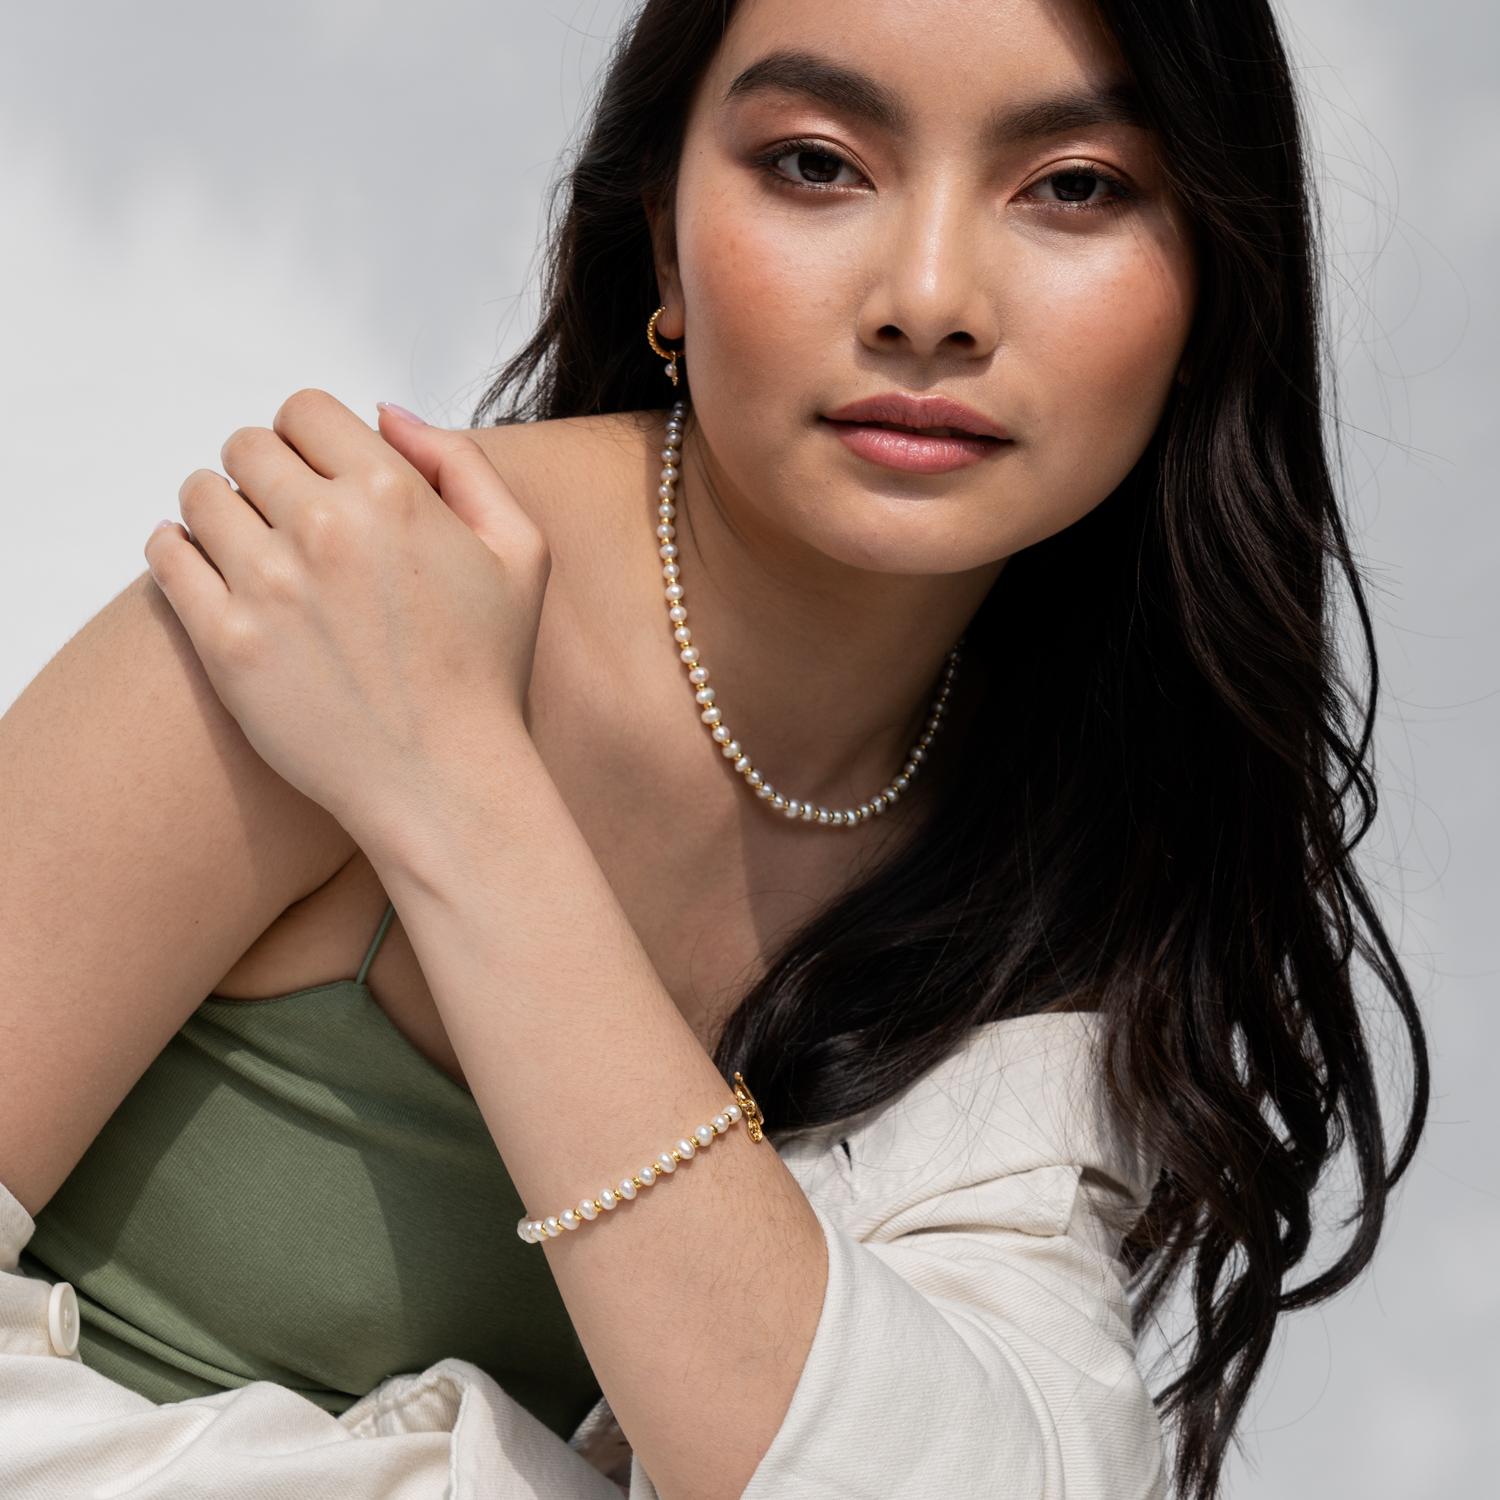 Thread by hand in our London studio, this pearl bracelet will slip seamlessly into your collection of style staples. The modern mix of lustrous white freshwater pearls and radiant gold vermeil beads makes it perfect for layering up with other